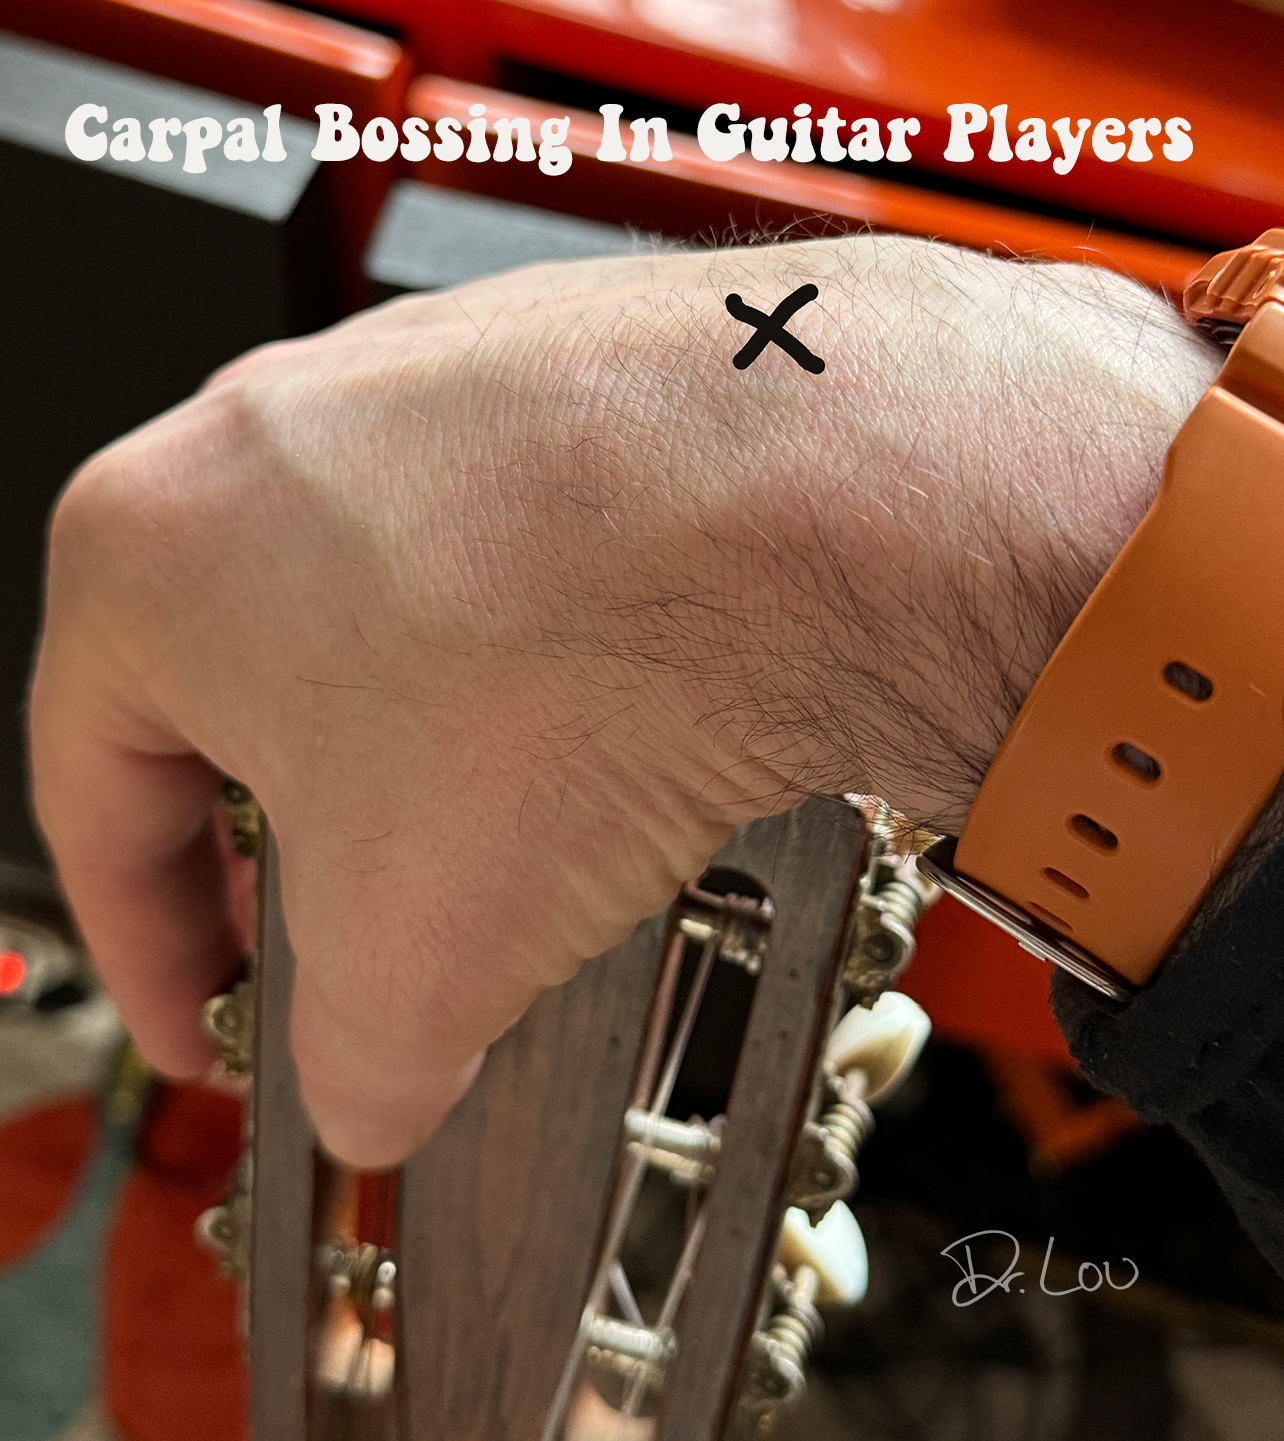 Carpal boss, or carpal bossing is not always serious. But when it is, it can destroy musical careers.